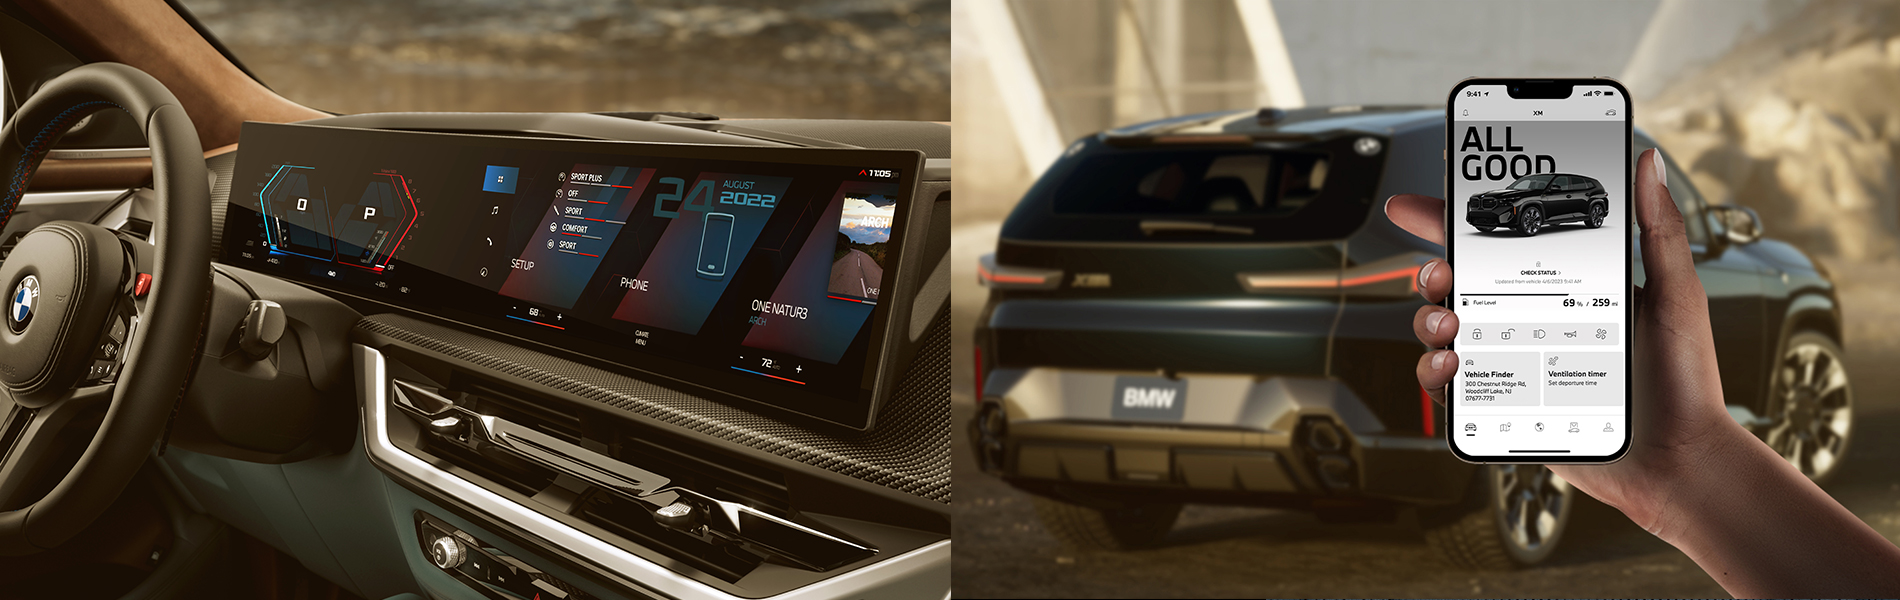  BMW XM Curved Display and My BMW app